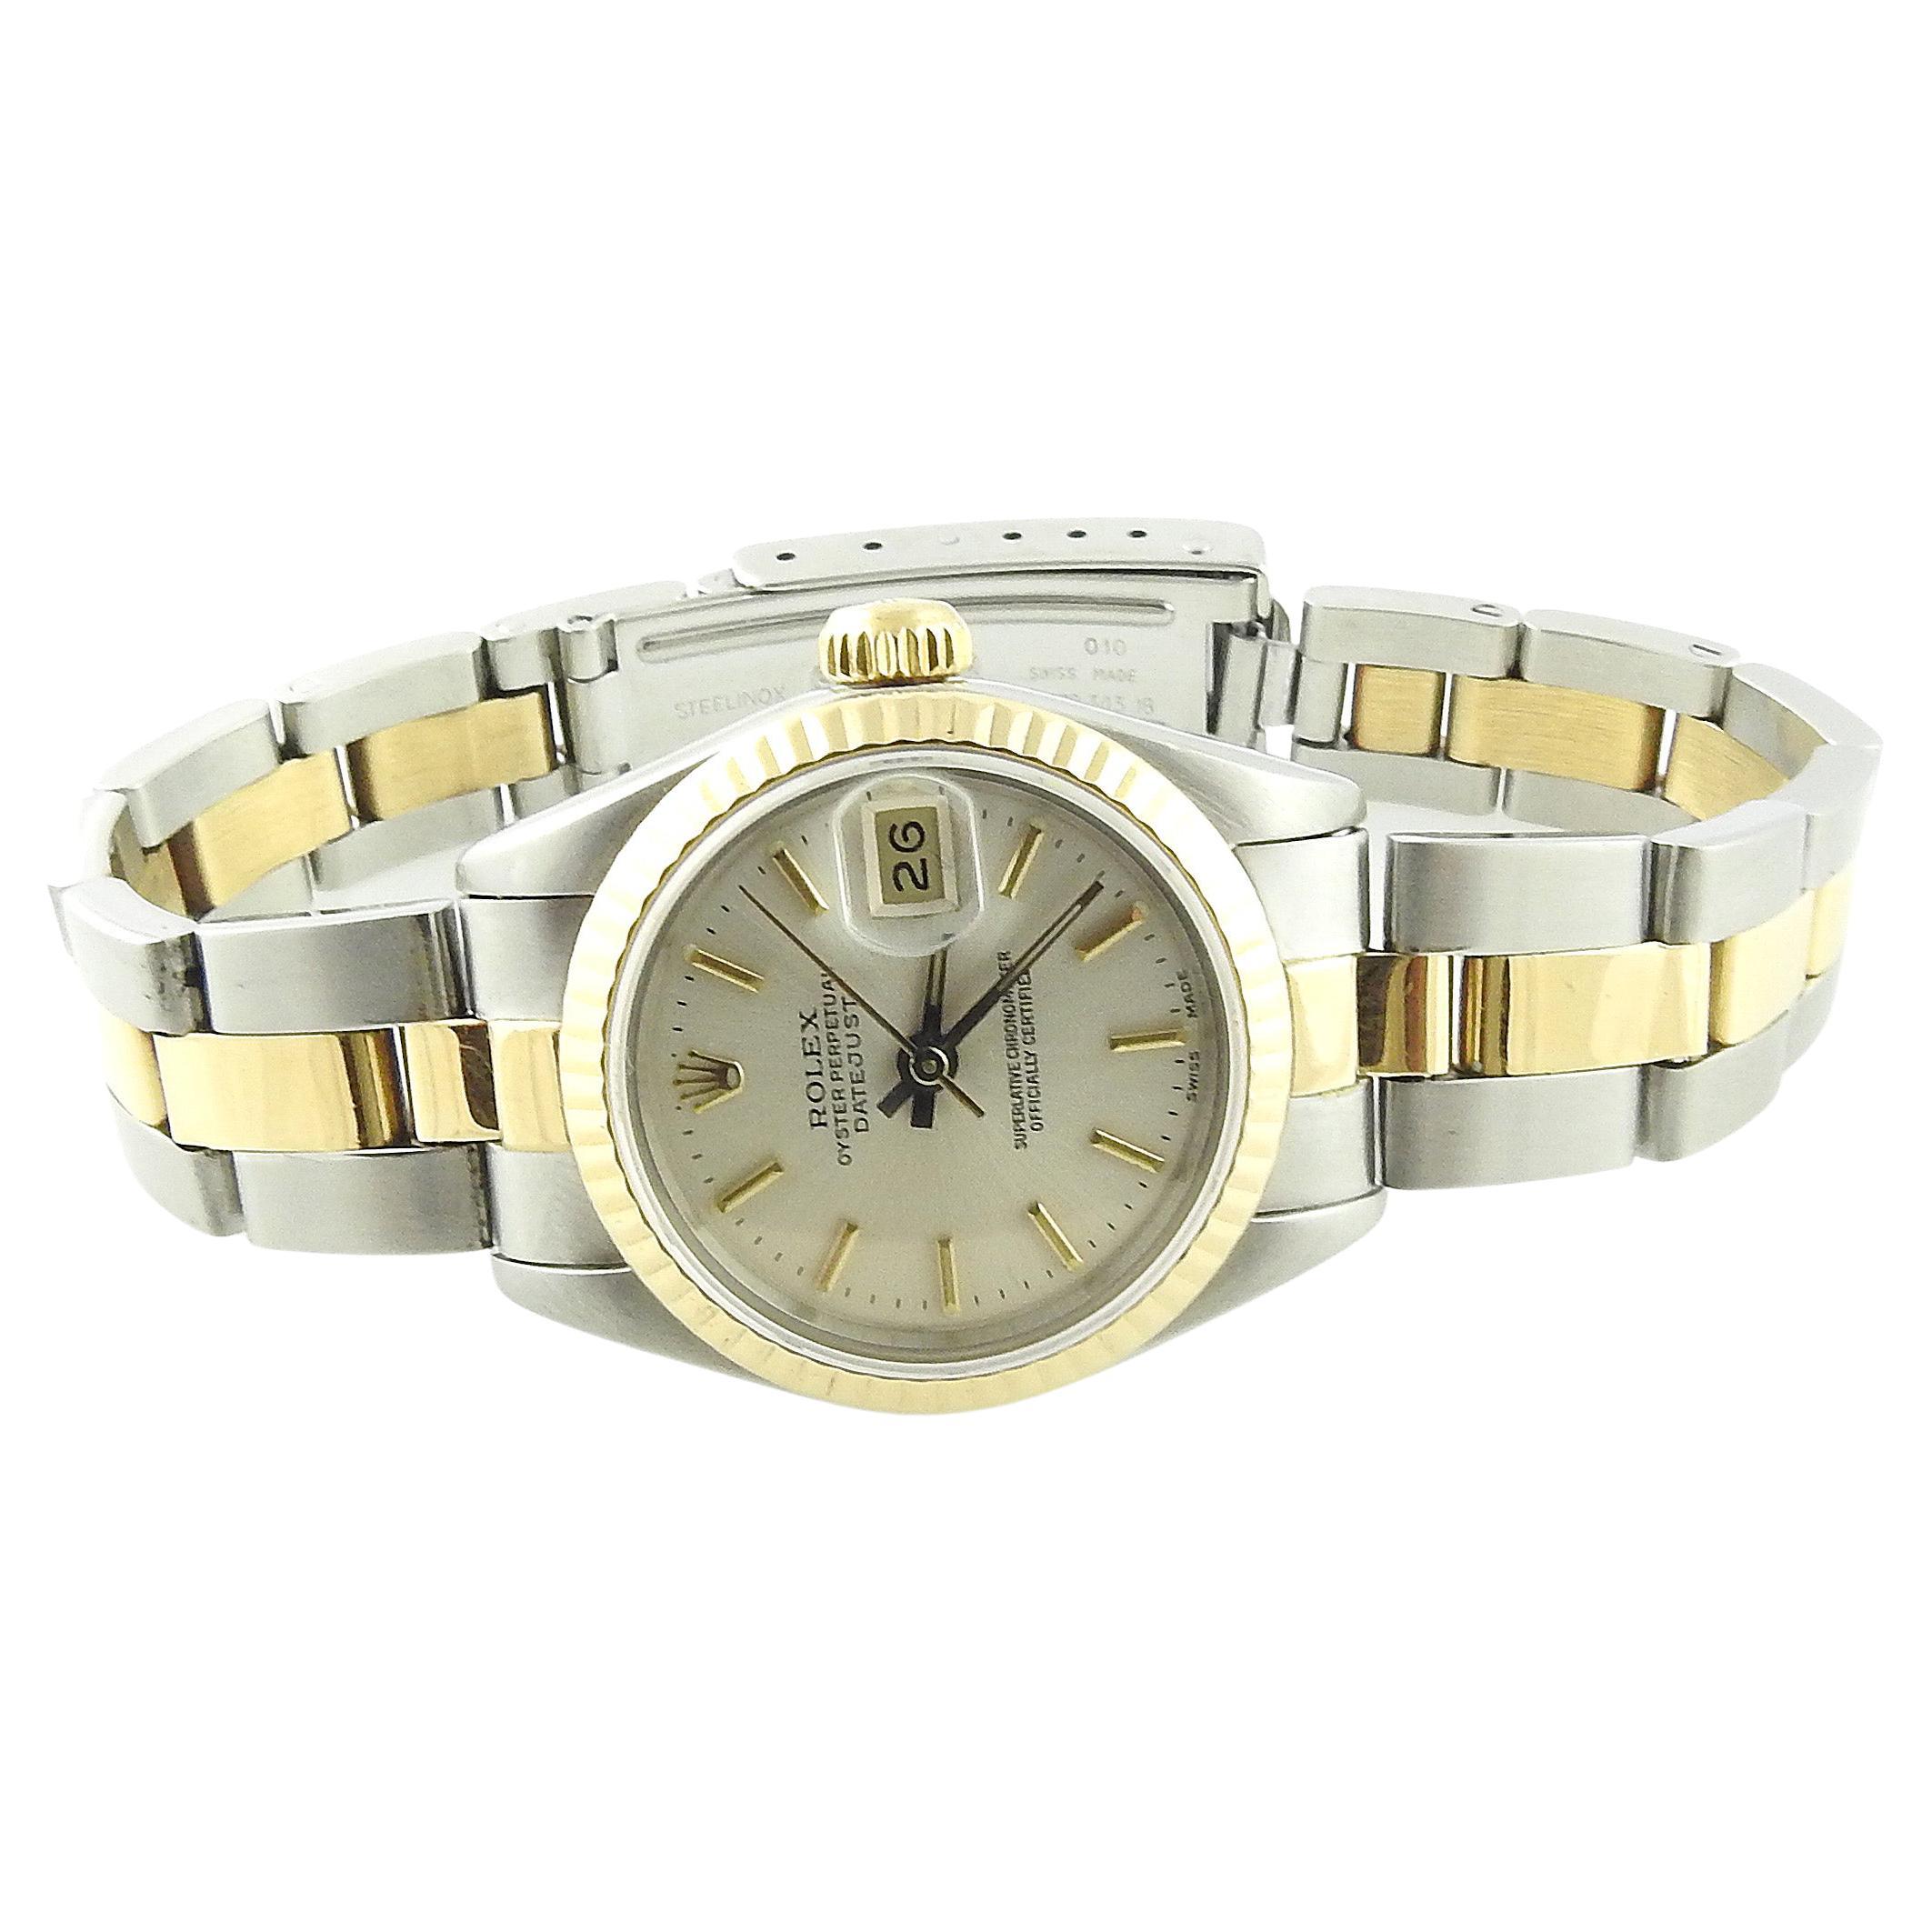 1990 Rolex Ladies Datejust Tow Tone Watch Silver Dial 69173 Box, Papers, Tag